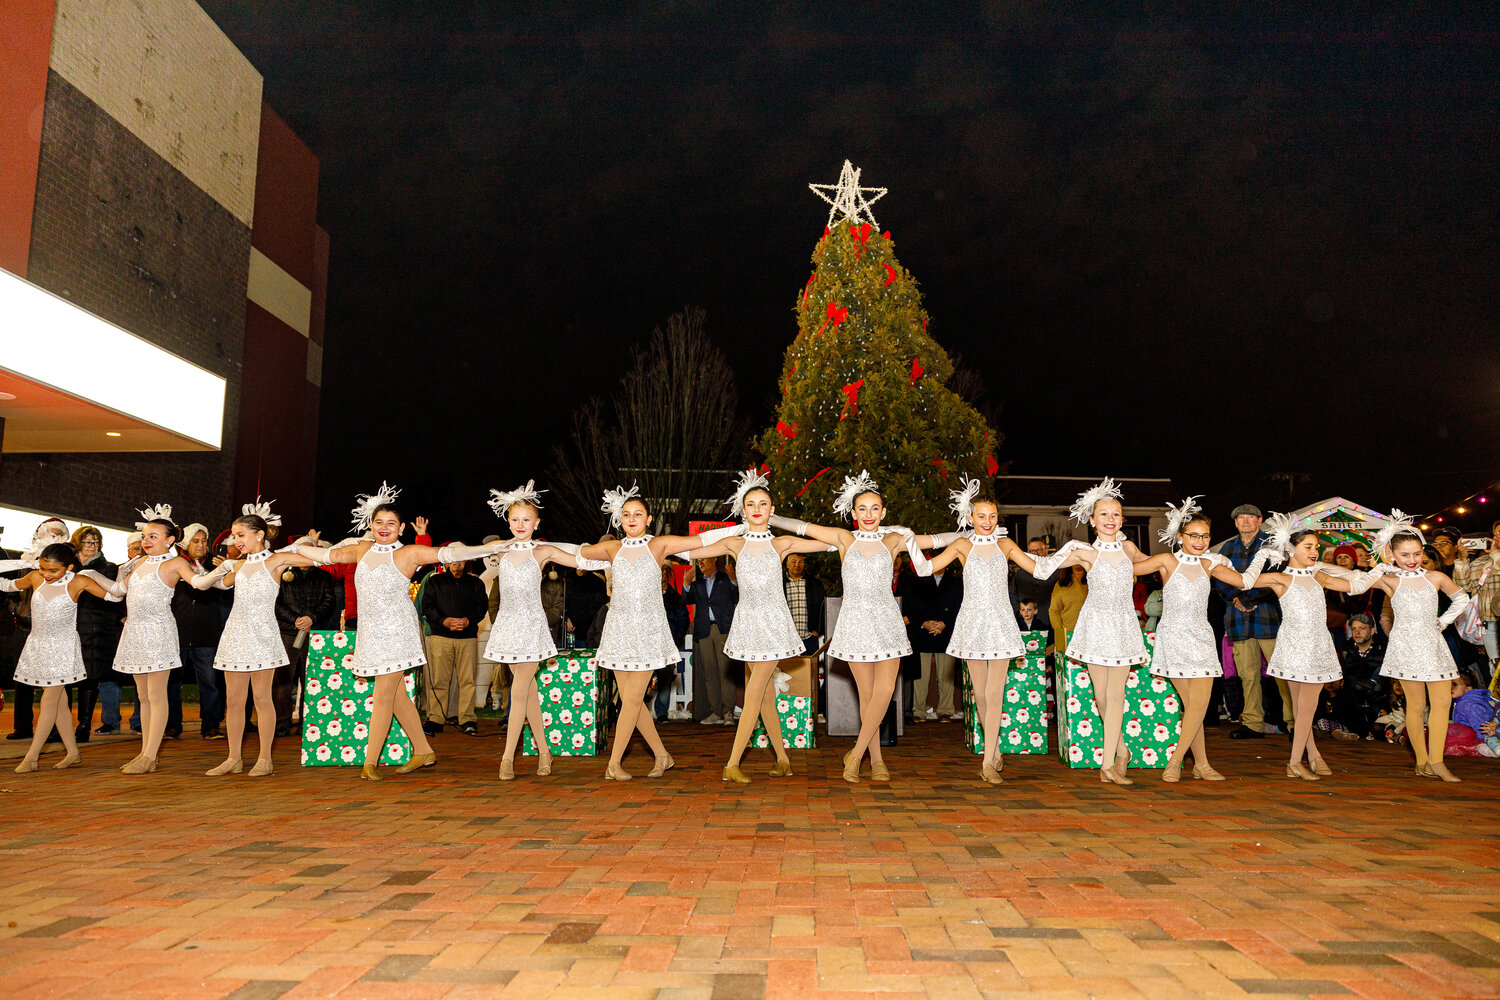 Young dancers from the Long Island Dance Workshop, clad in festive costumes, performed a joyful routine in front of the Christmas tree for onlookers during Lynbrook village’s annual tree lighting celebration.